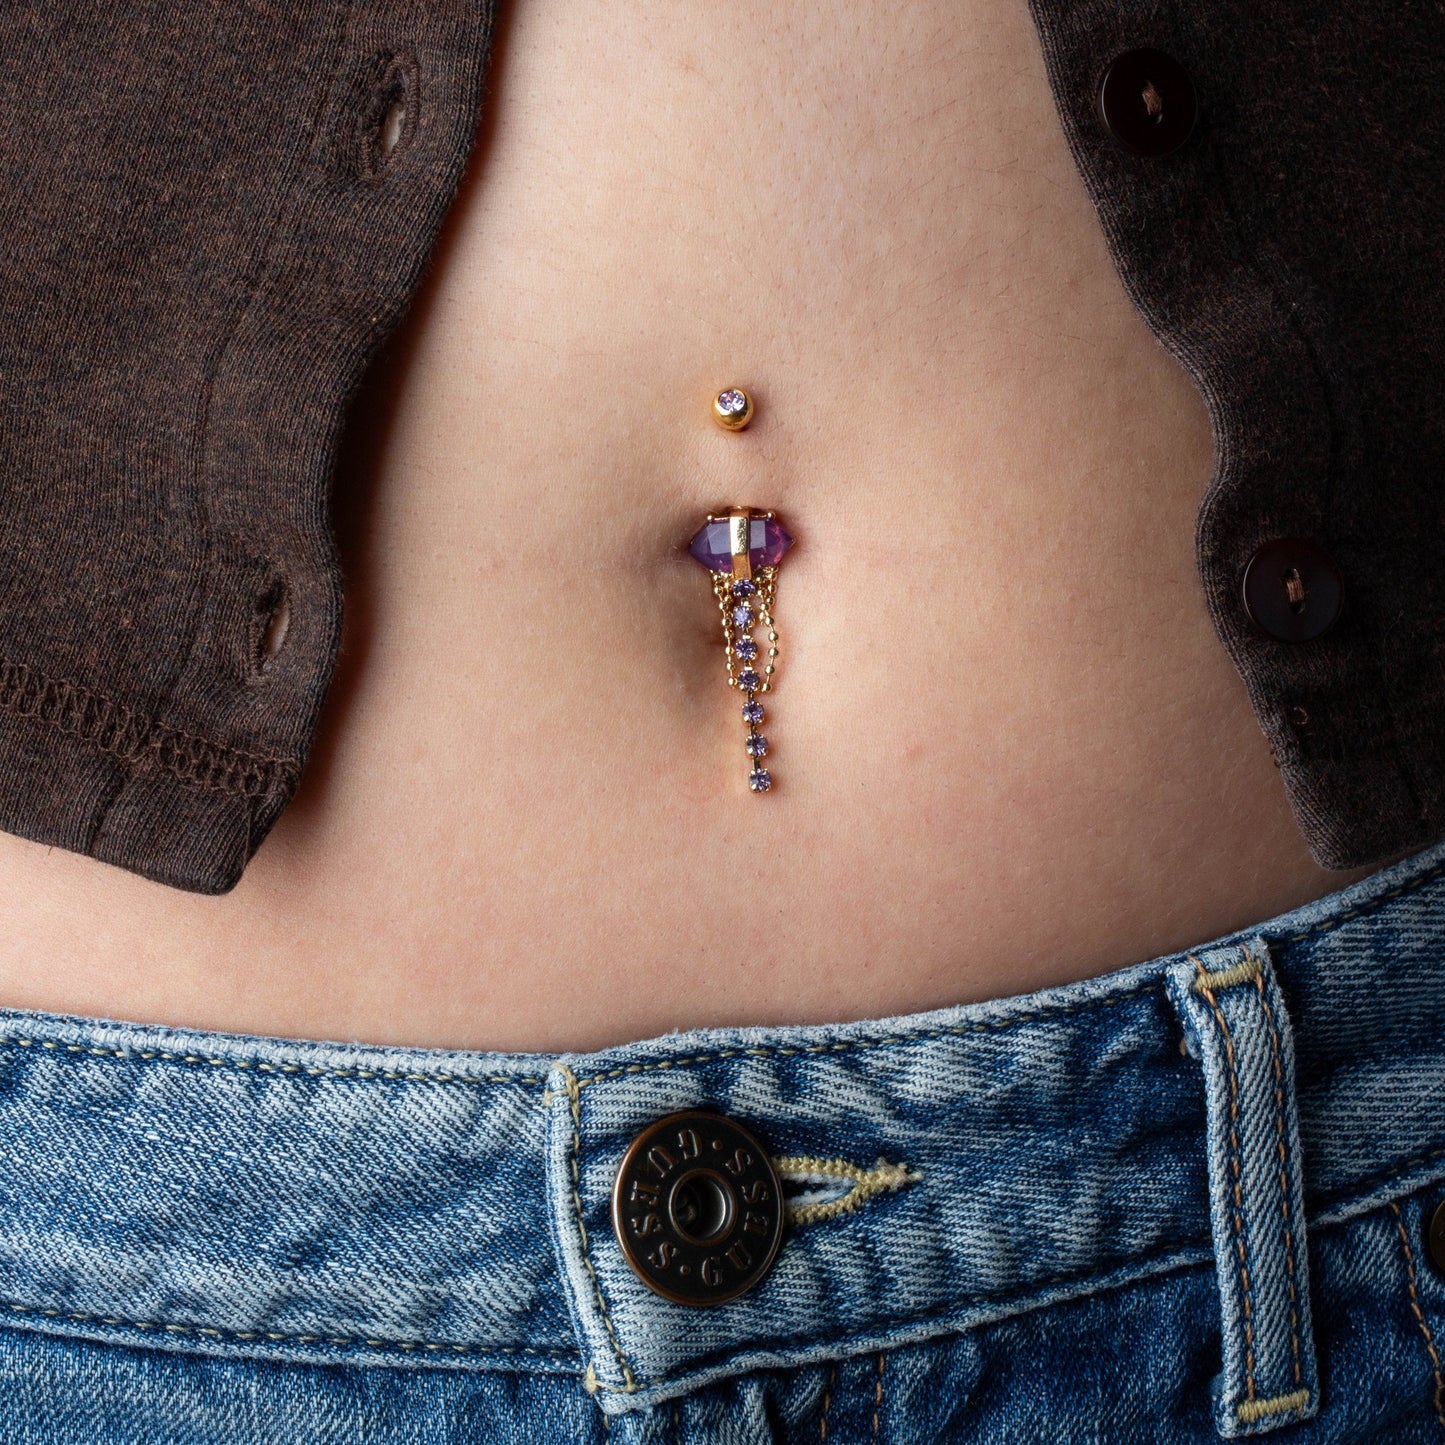 Amethyst Crystal with Dangling Gems and Beads Belly Button Ring - 316L Stainless Steel